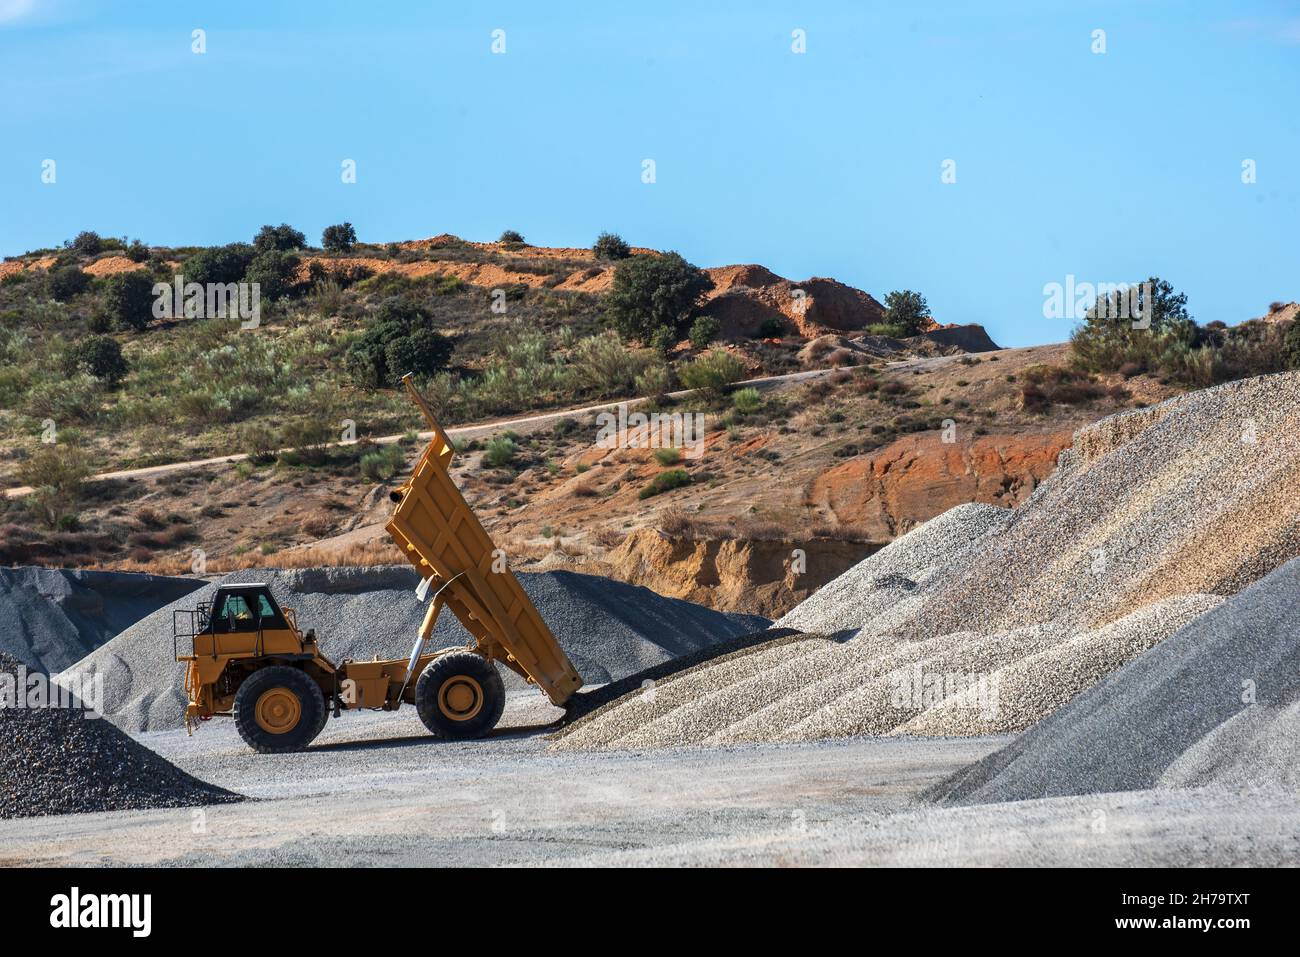 Large dump truck with the tipper raised unloading sand in a quarry. Stock Photo